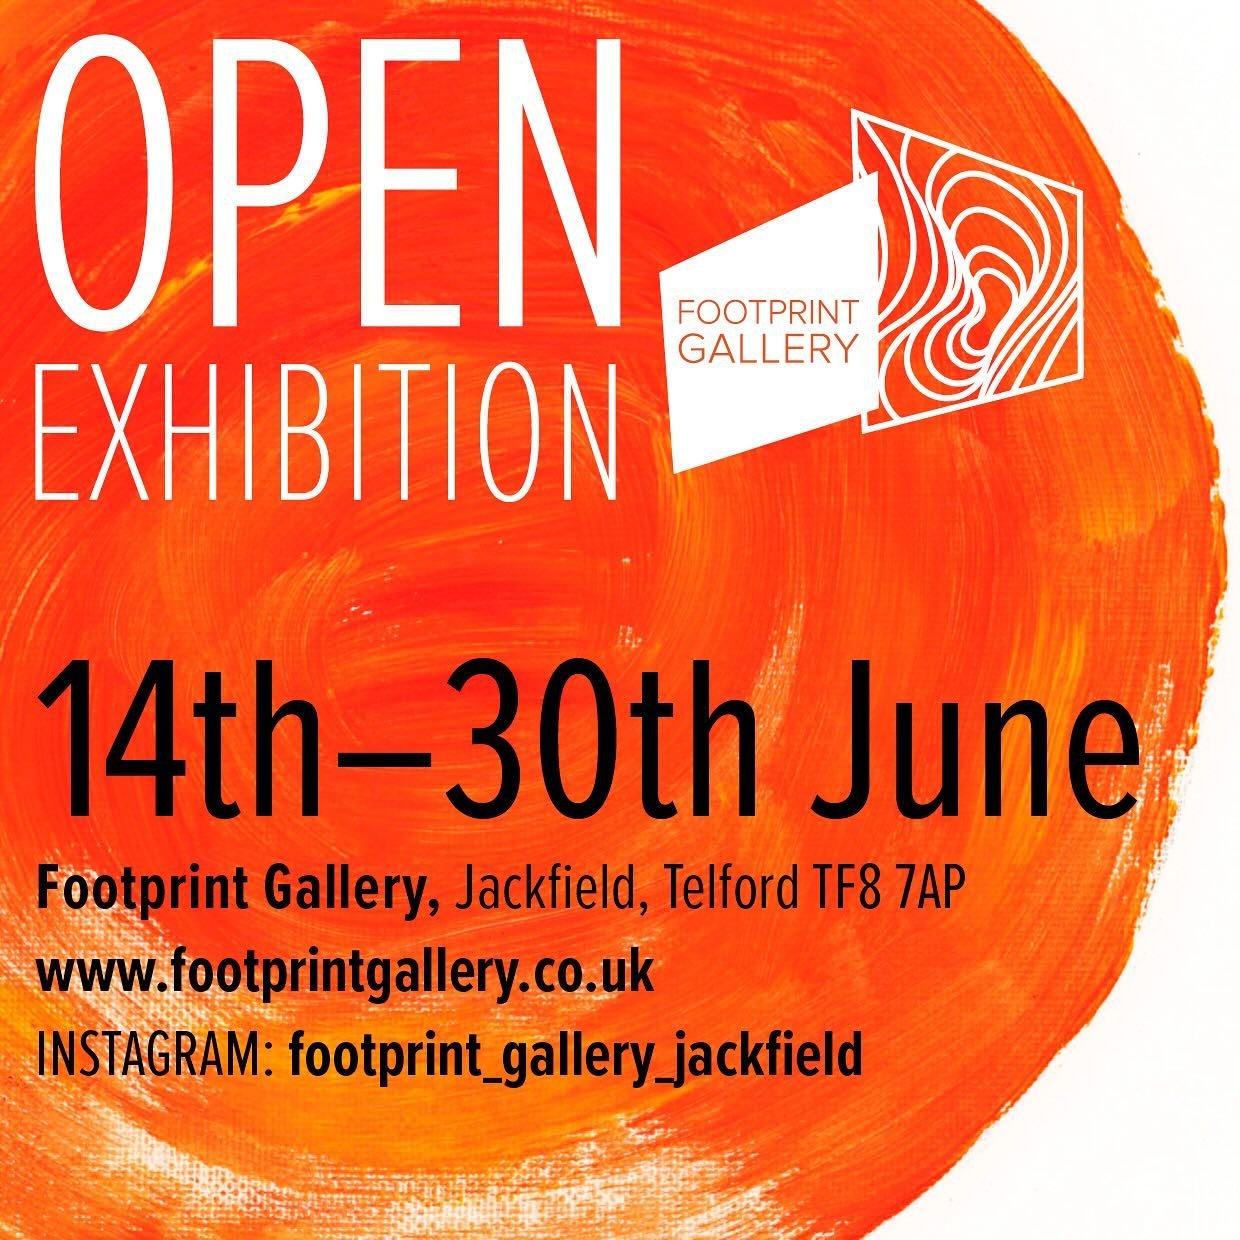 📨Emails have gone out today to artists who have submitted their work for consideration to our first ever Open Exhibition. The team have worked hard reviewing all the entries. 

✅So please do check your emails and spam. 

❣️We are delighted with the 